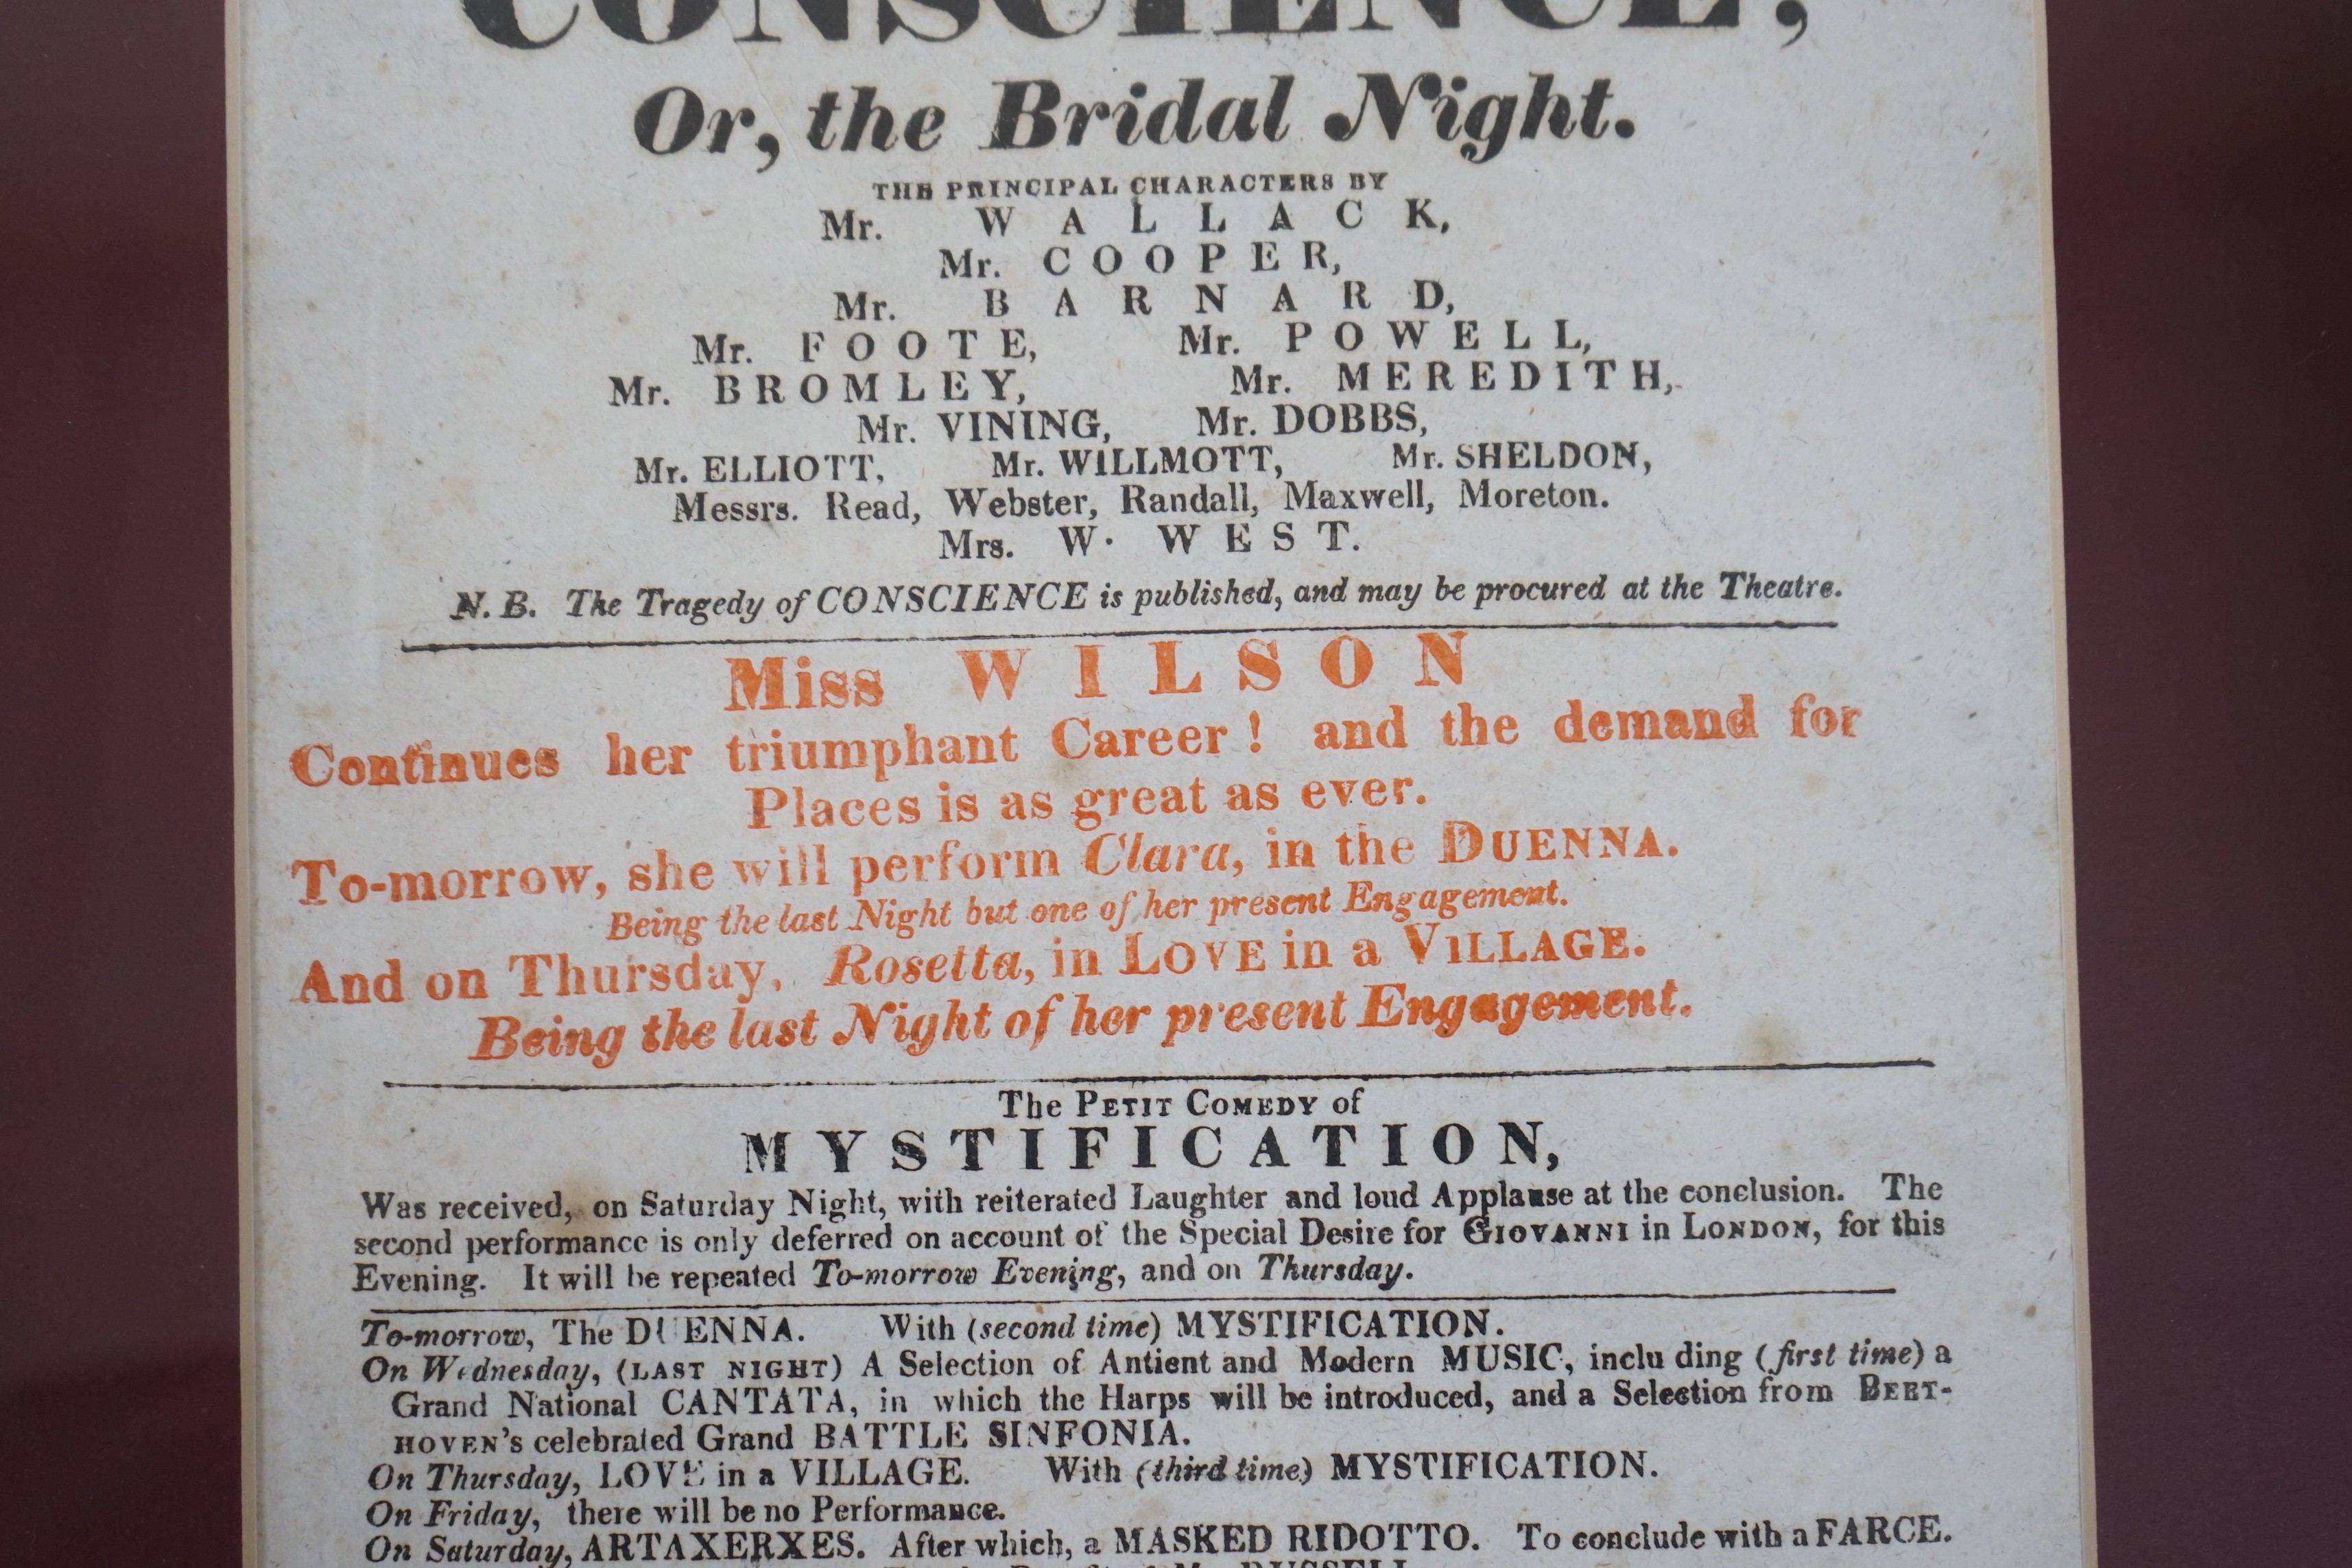 'Conscience; Or The Bridal Night’, Theatre Royal, Drury Lane, April 9, 1821, a framed theatre billboard poster, 32x18cm excl frame